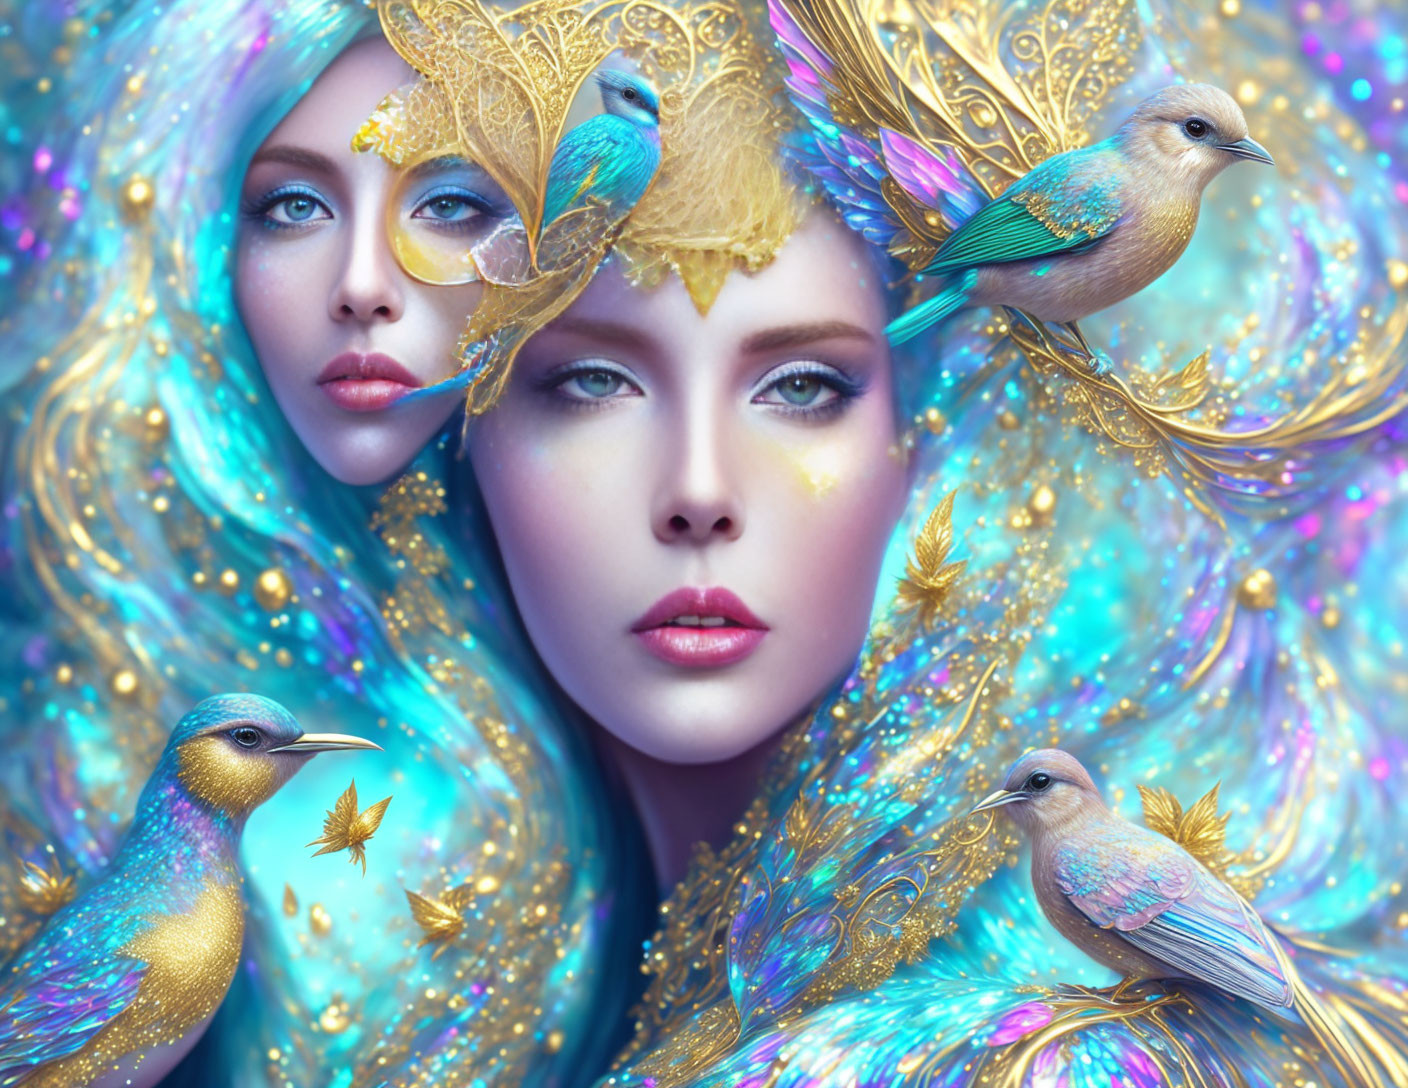 Fantastical portrait of woman with blue hair, gold adornments, colorful birds, glittery backdrop